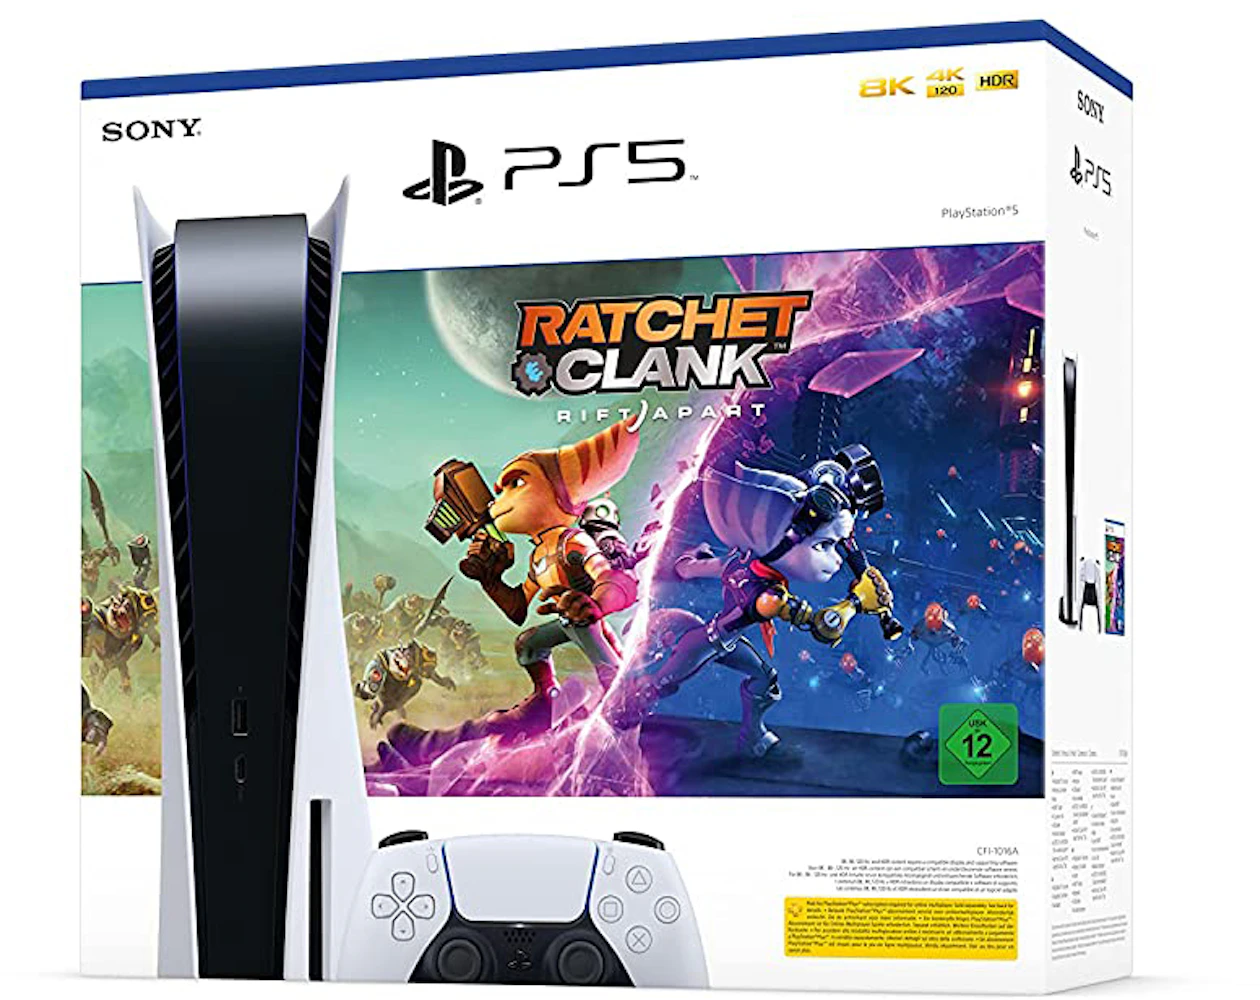 Ratchet & Clank Rift Apart (PS5) cheap - Price of $23.21